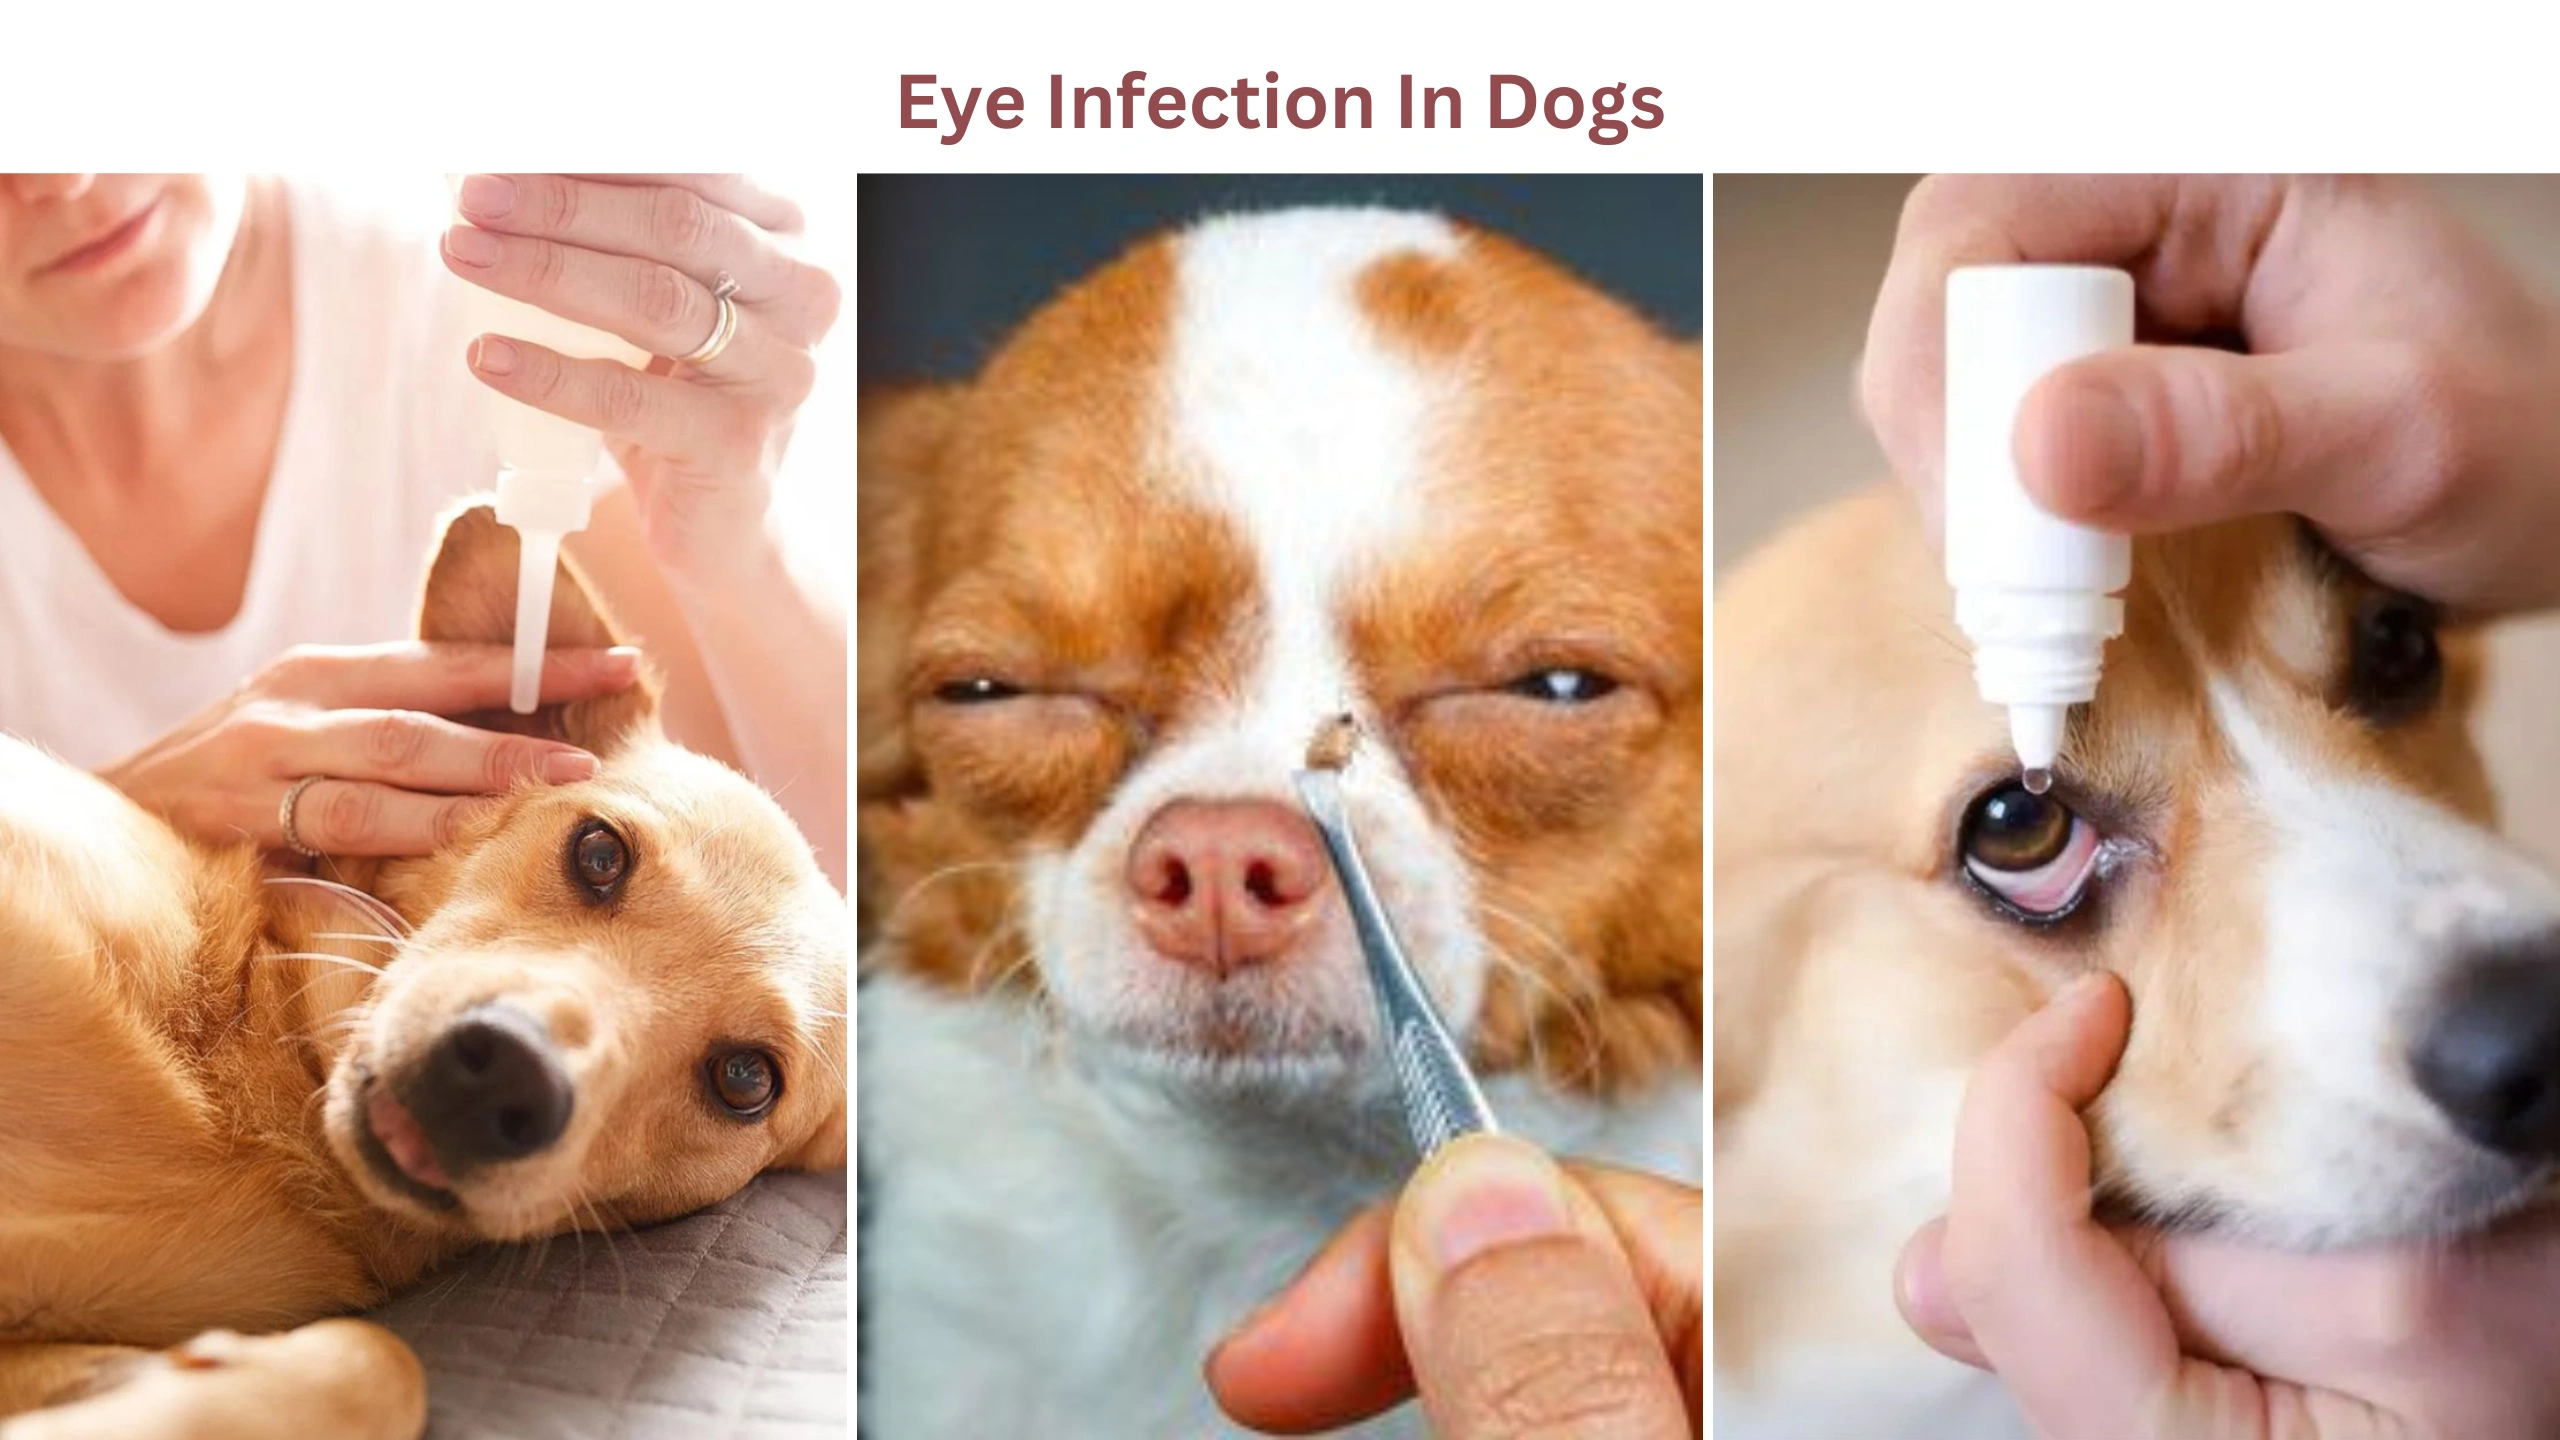 Eye infection in dogs